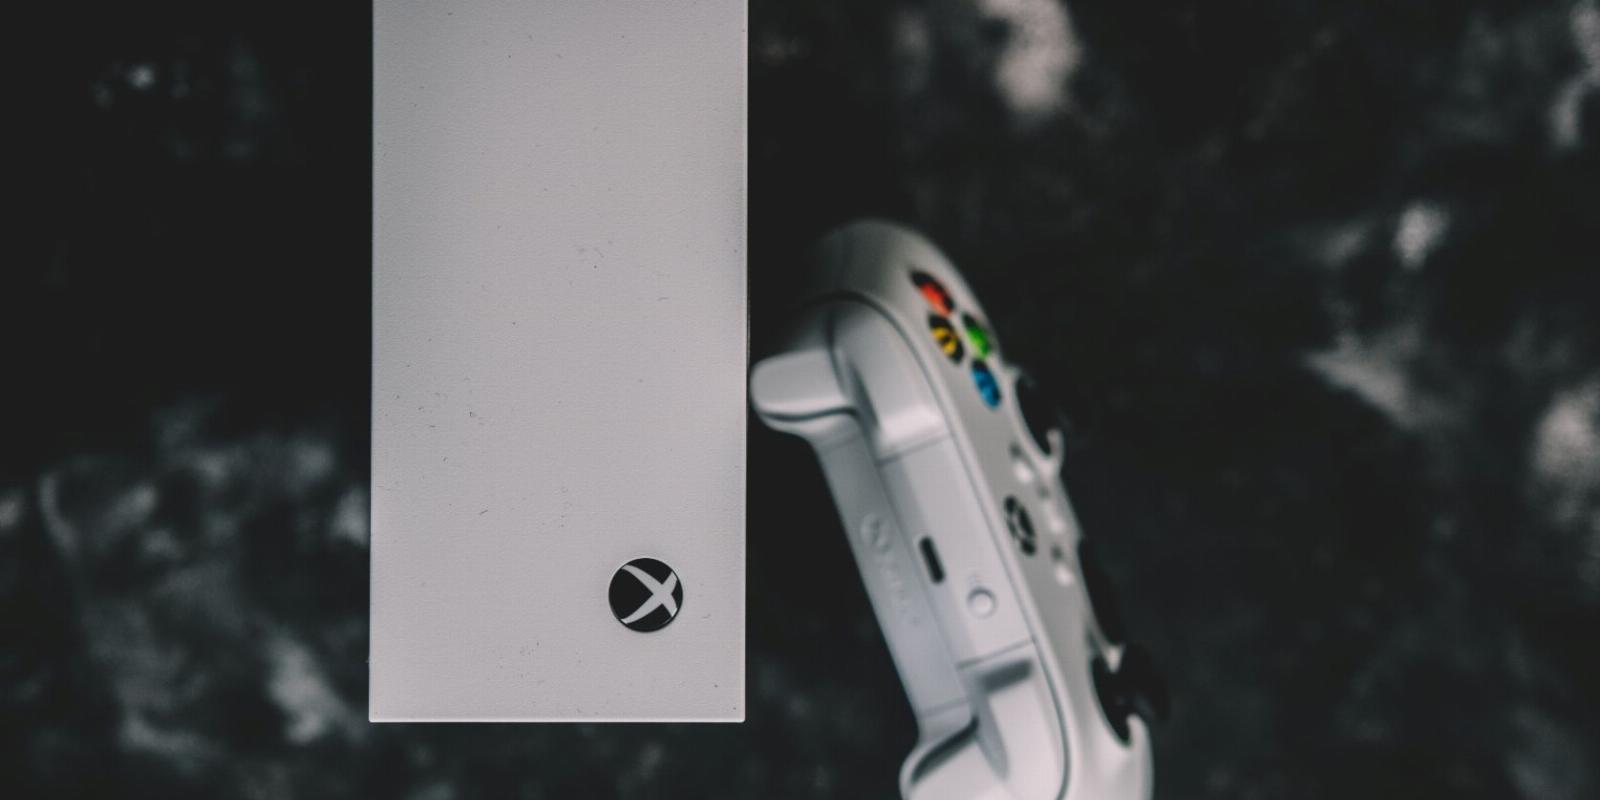 Why Your Xbox Will Now Shut Down Rather Than Sleep